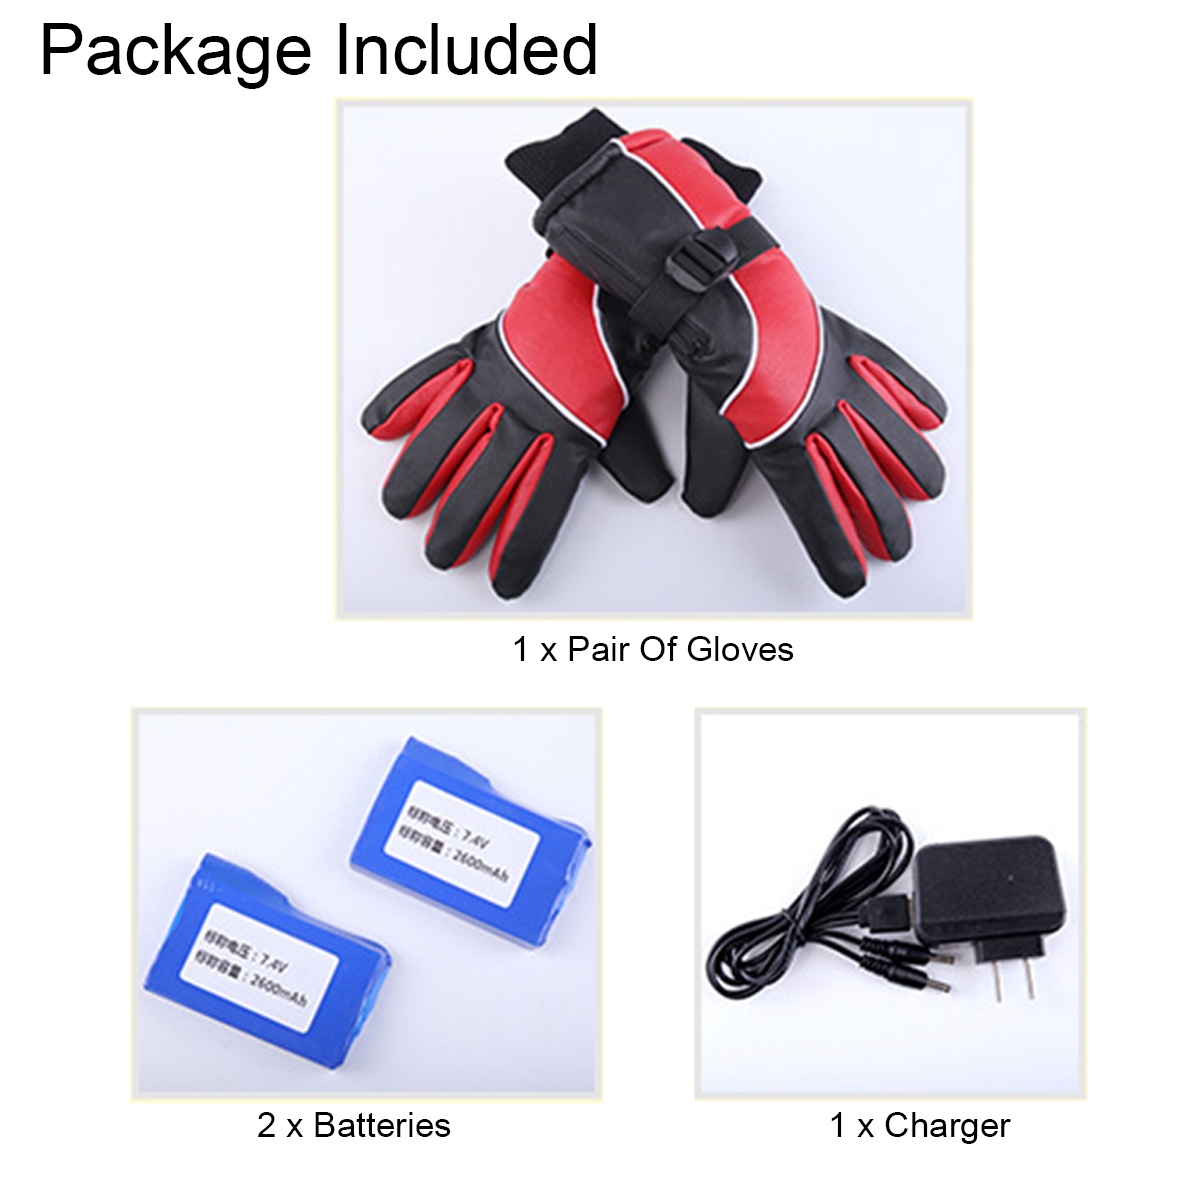 2600mAh-74V-Electric-Rechargeable-Battery-Heated-Motorcycle-Gloves-Waterproof-Winter-Warm-Hand-1391589